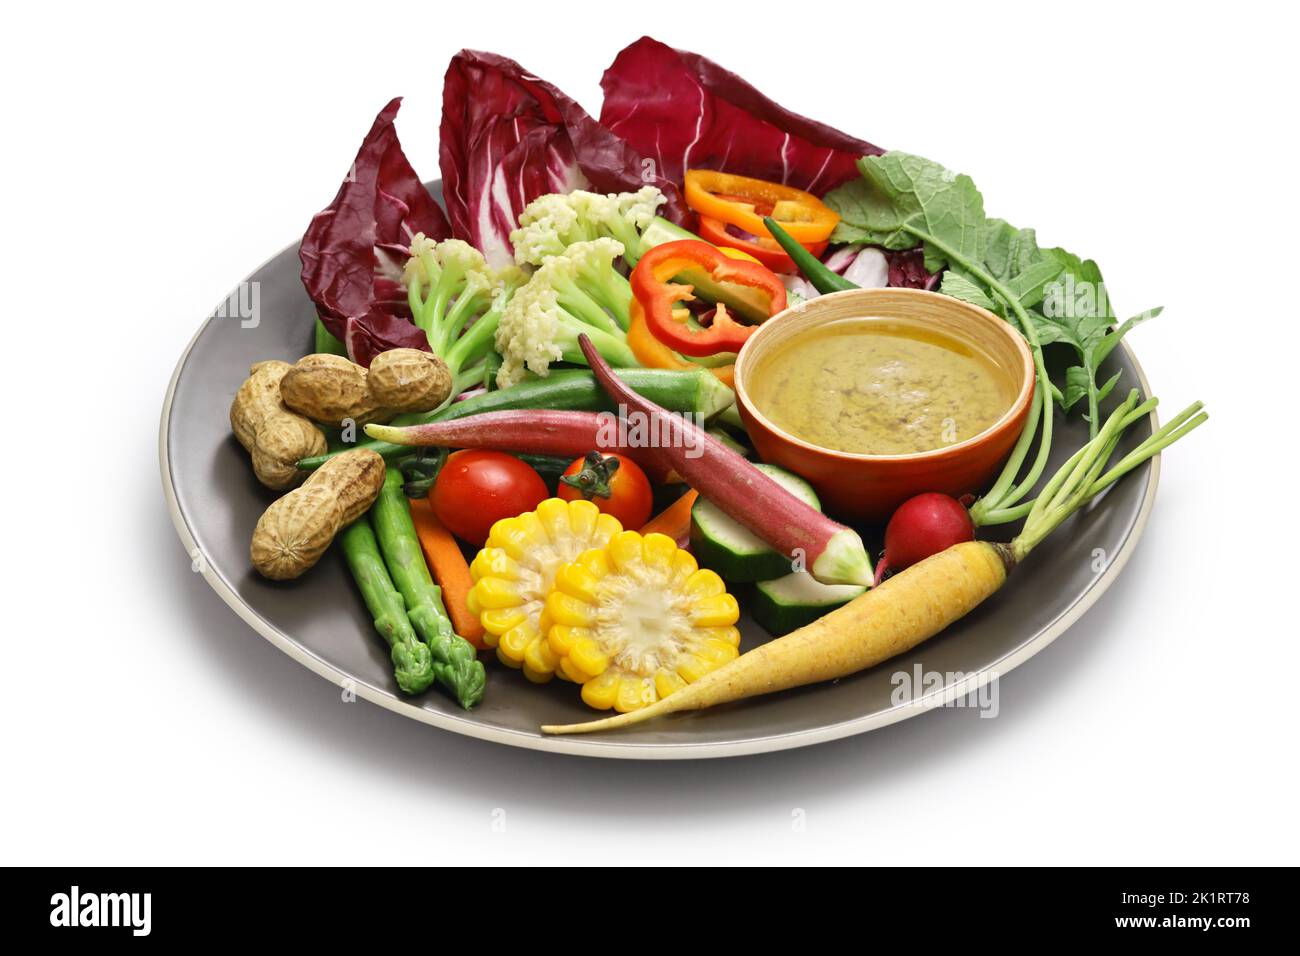 vegetable salad and bagna cauda (a garlic and anchovy sauce for dipping vegetables) Stock Photo